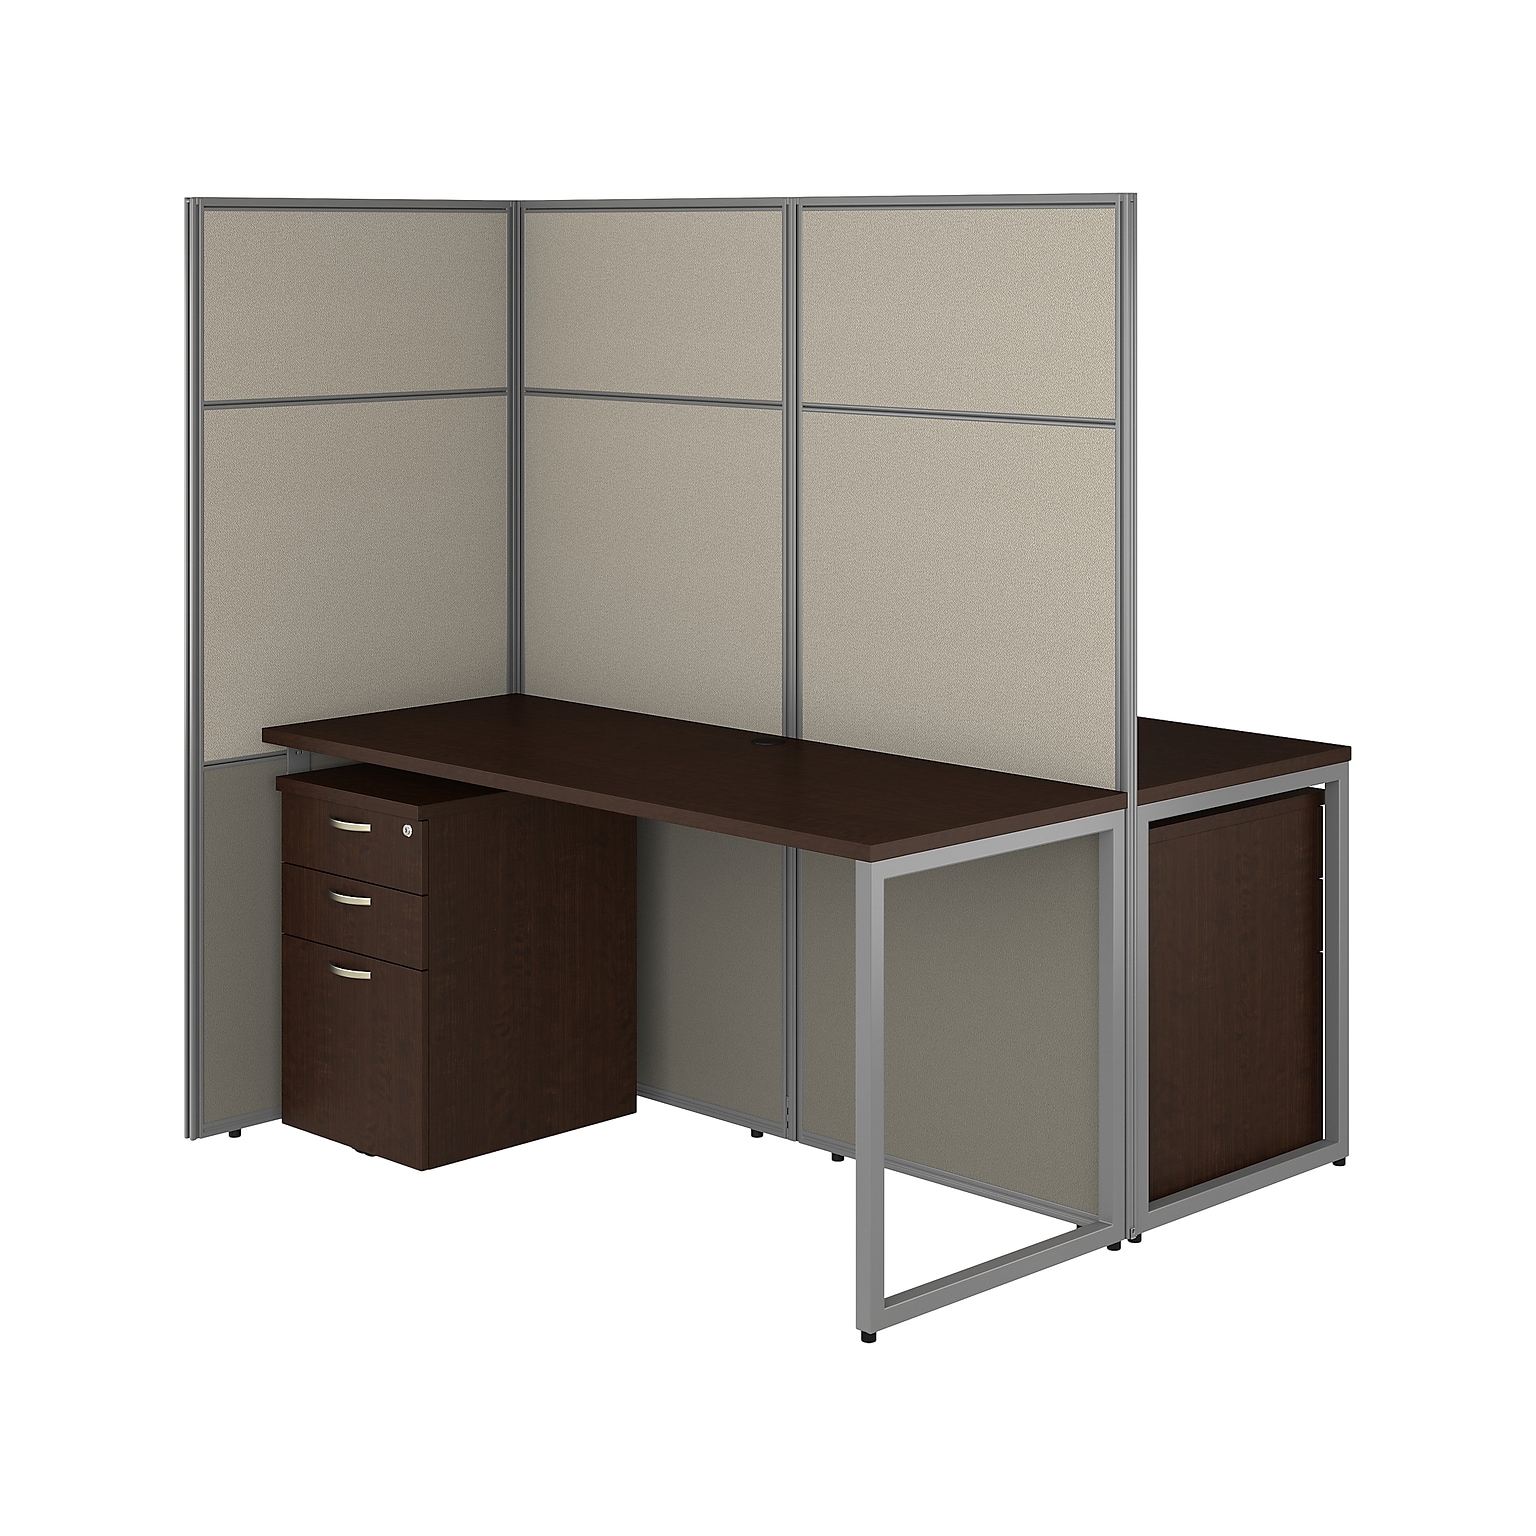 Bush Business Furniture Easy Office 66.34H x 60W 2 Person Back to Back Cubicle Panel Workstation, Mocha Cherry (EODH46SMR-03K)